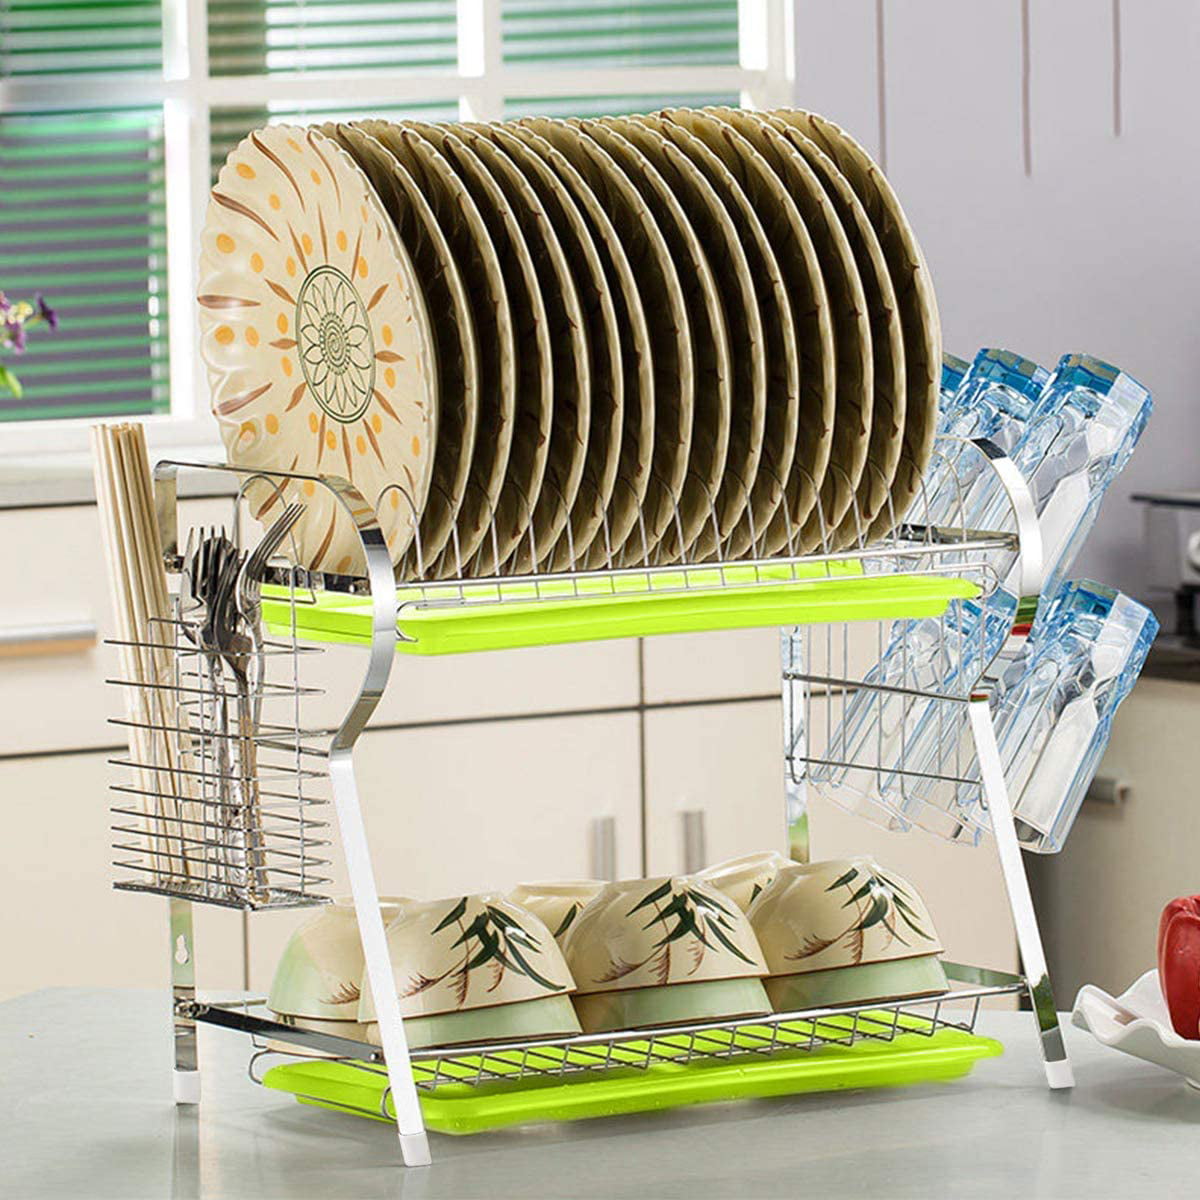 Details about   Dish Drainer Drip Tray Rack 2 Tier Cutlery Bowls Plates Utensils Holder Rack 